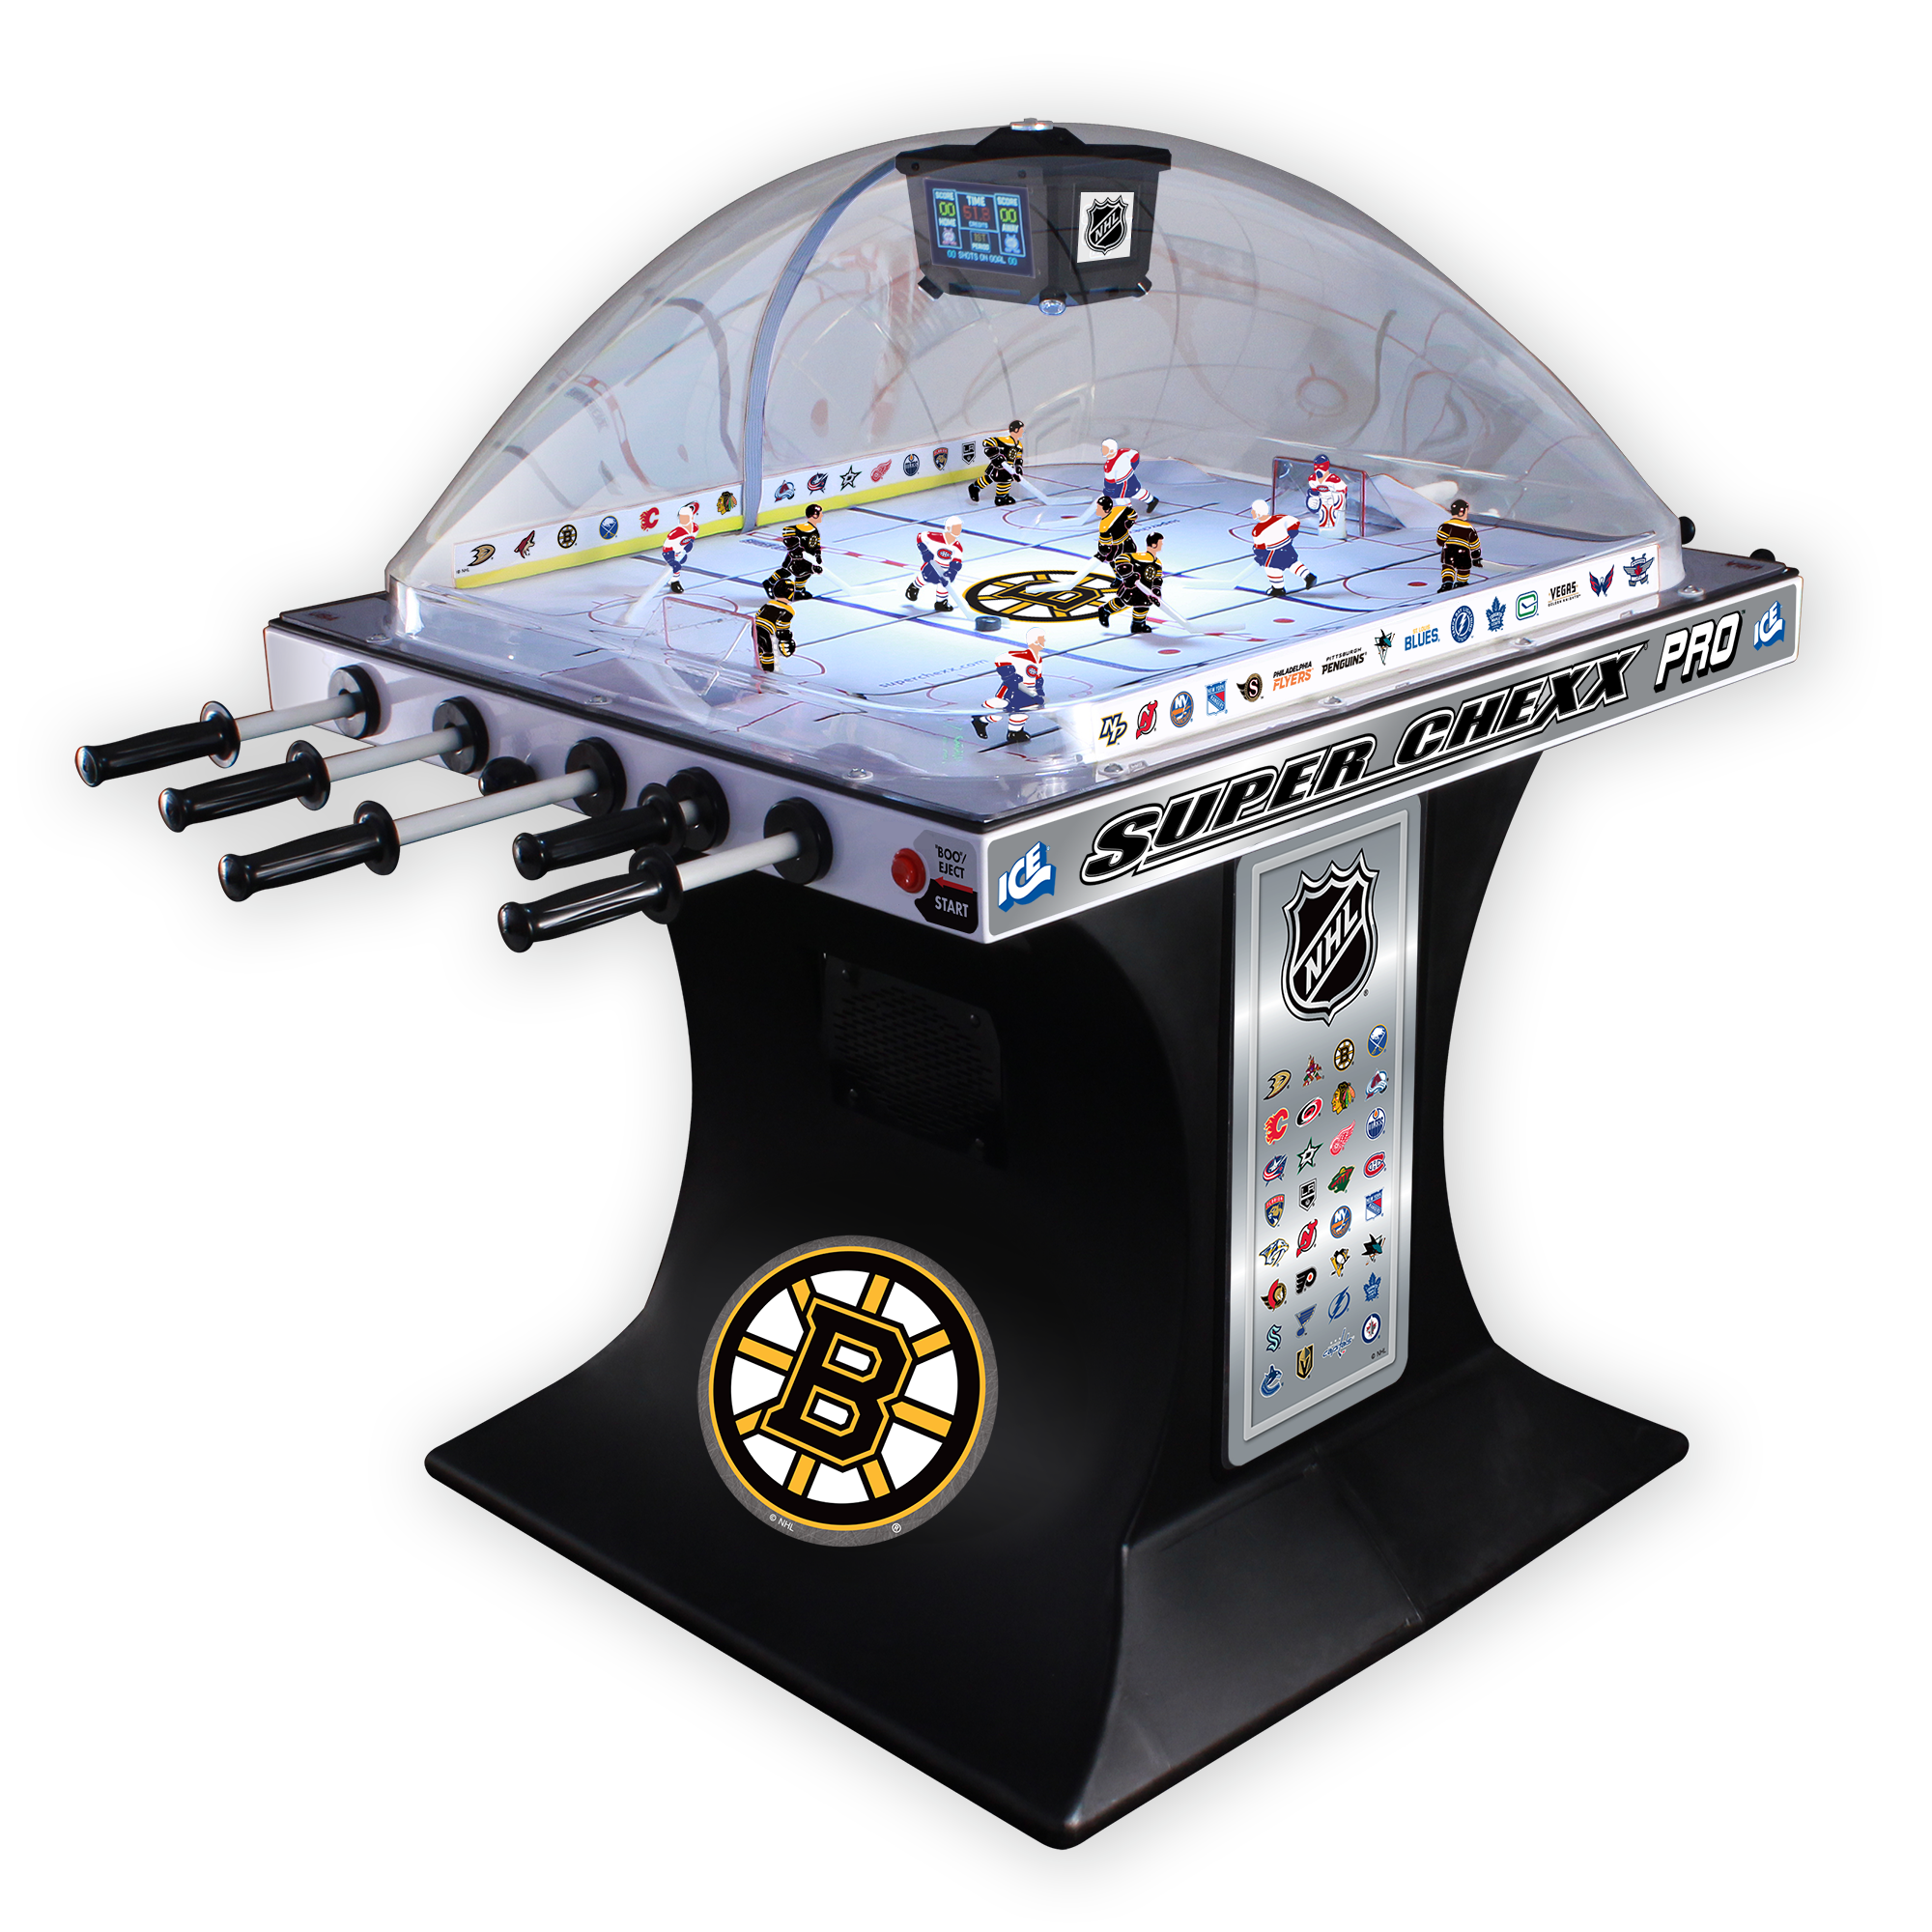 Buy NHL Licensed Super Chexx Pro Bubble Hockey - Choose Your Teams! Online at $